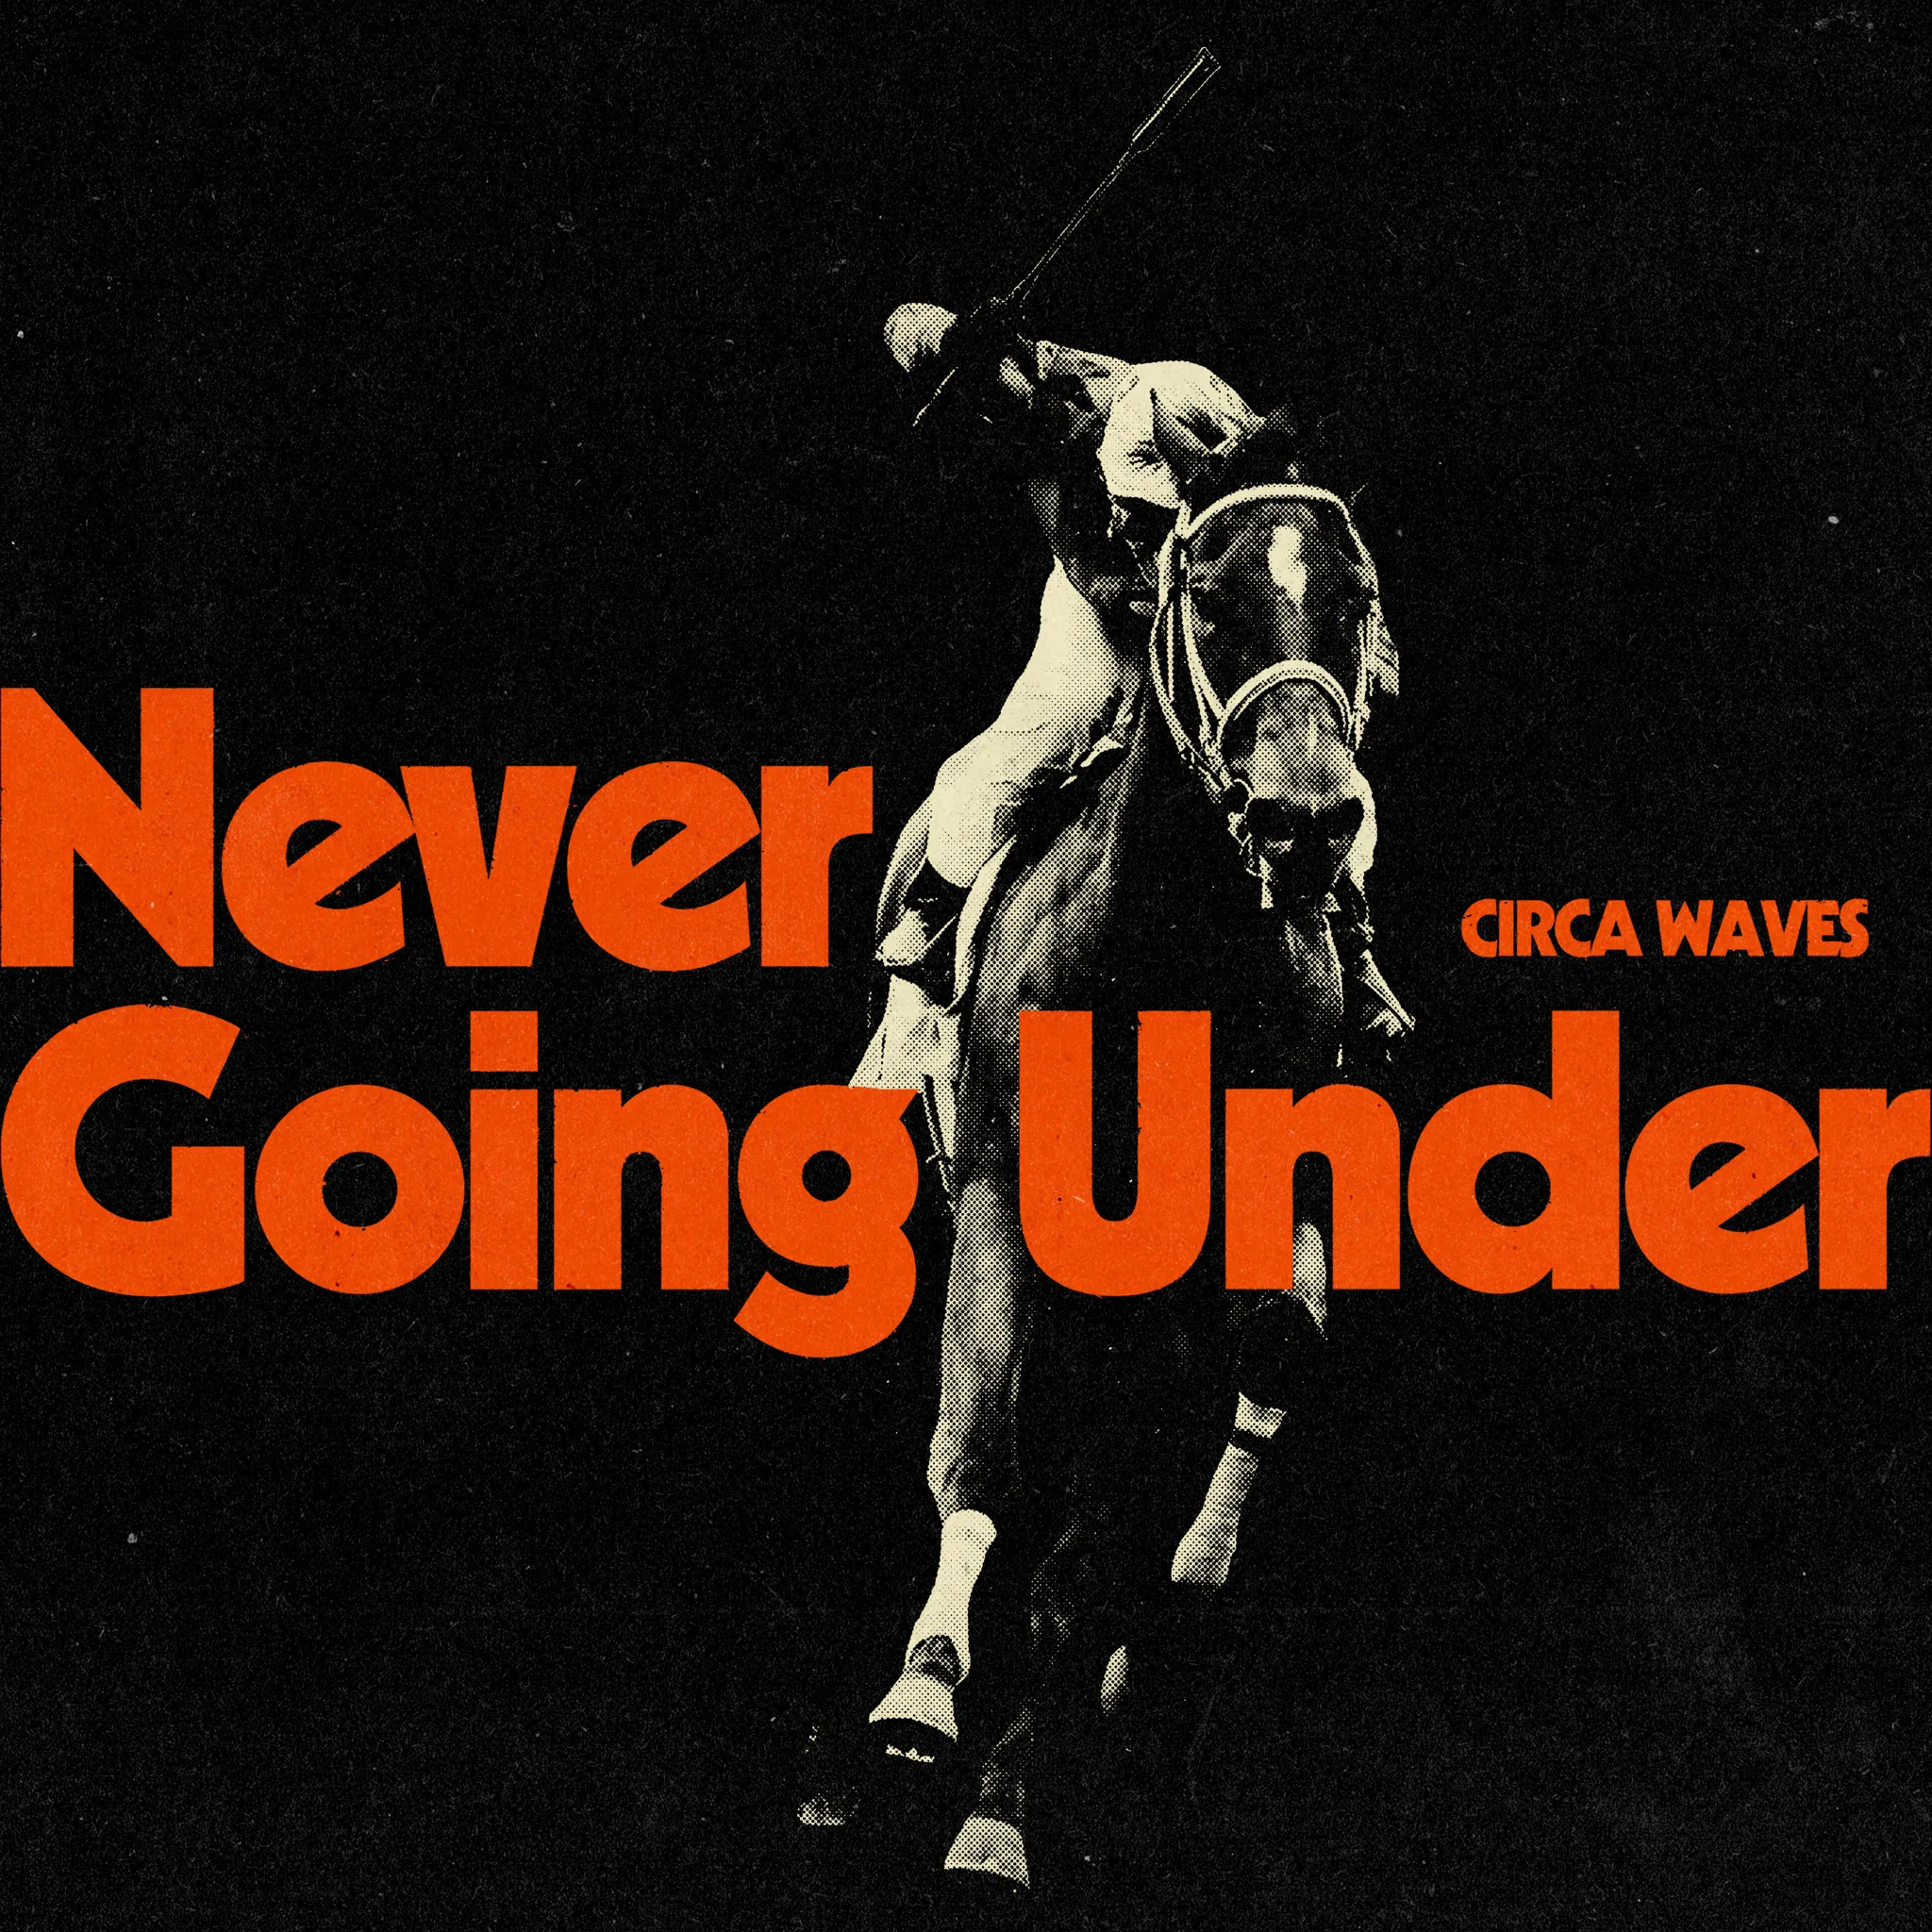 <strong>Circa Waves - Never Going Under</strong> (Vinyl LP - white)